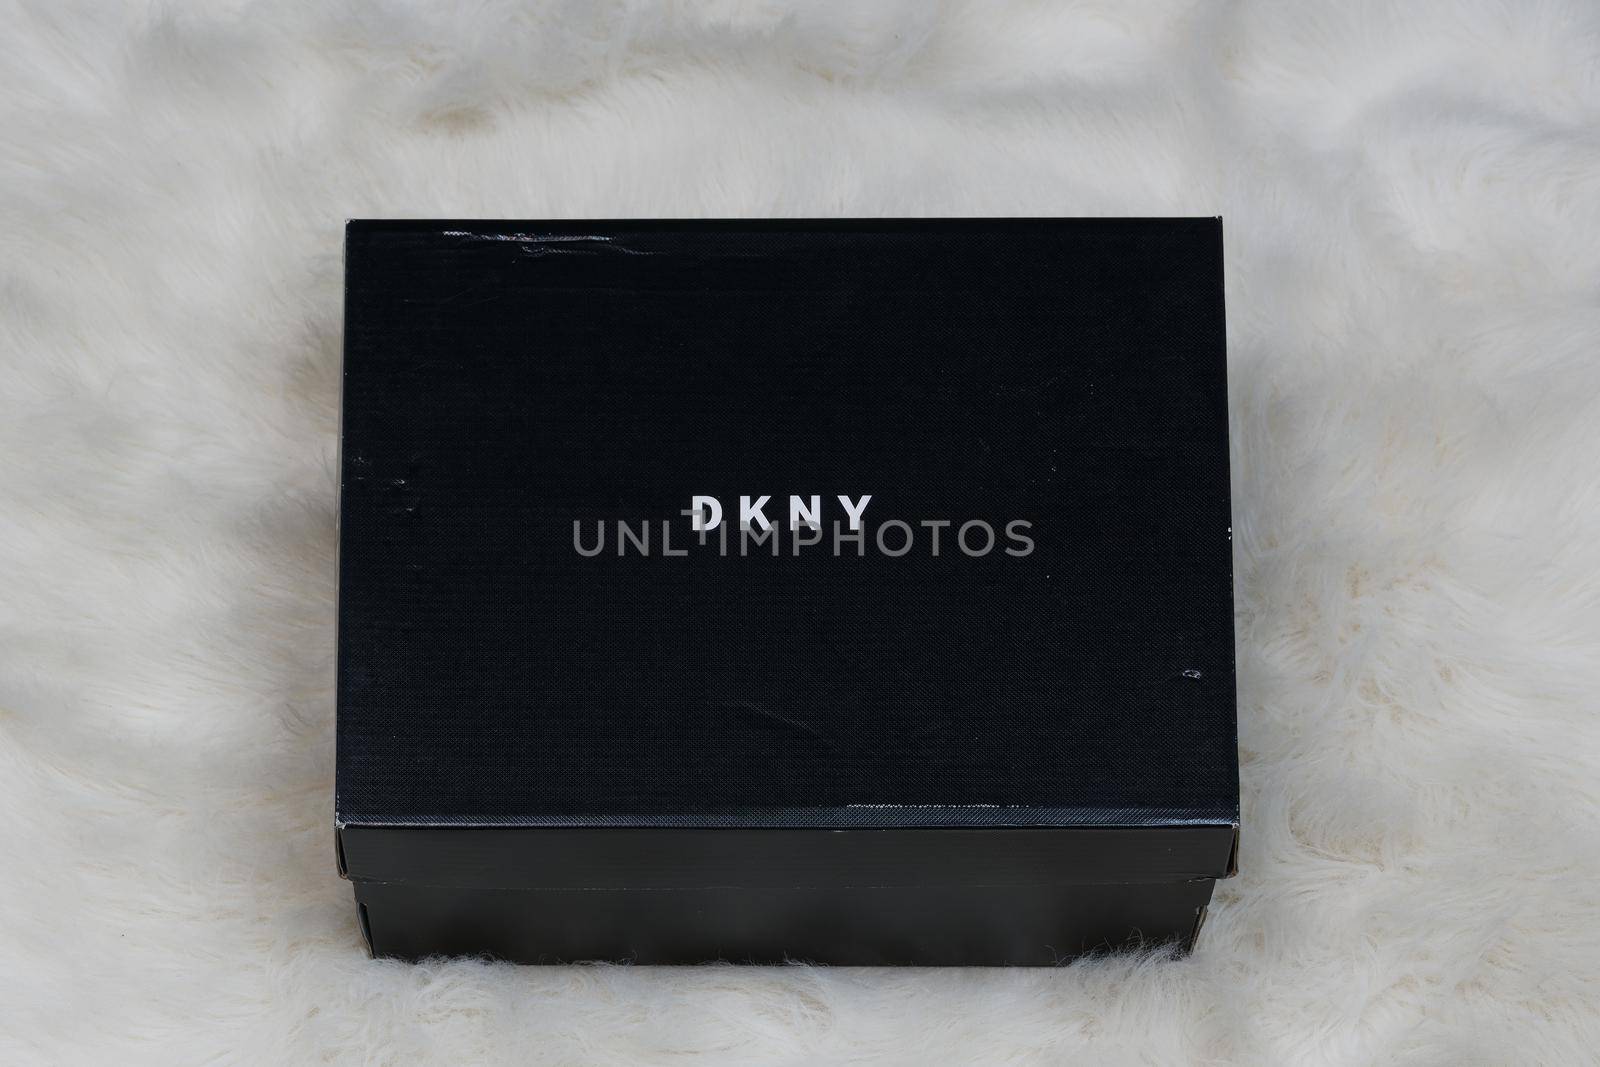 Display of order package containing a pair of DKNY fashion modern shoes with company logo.